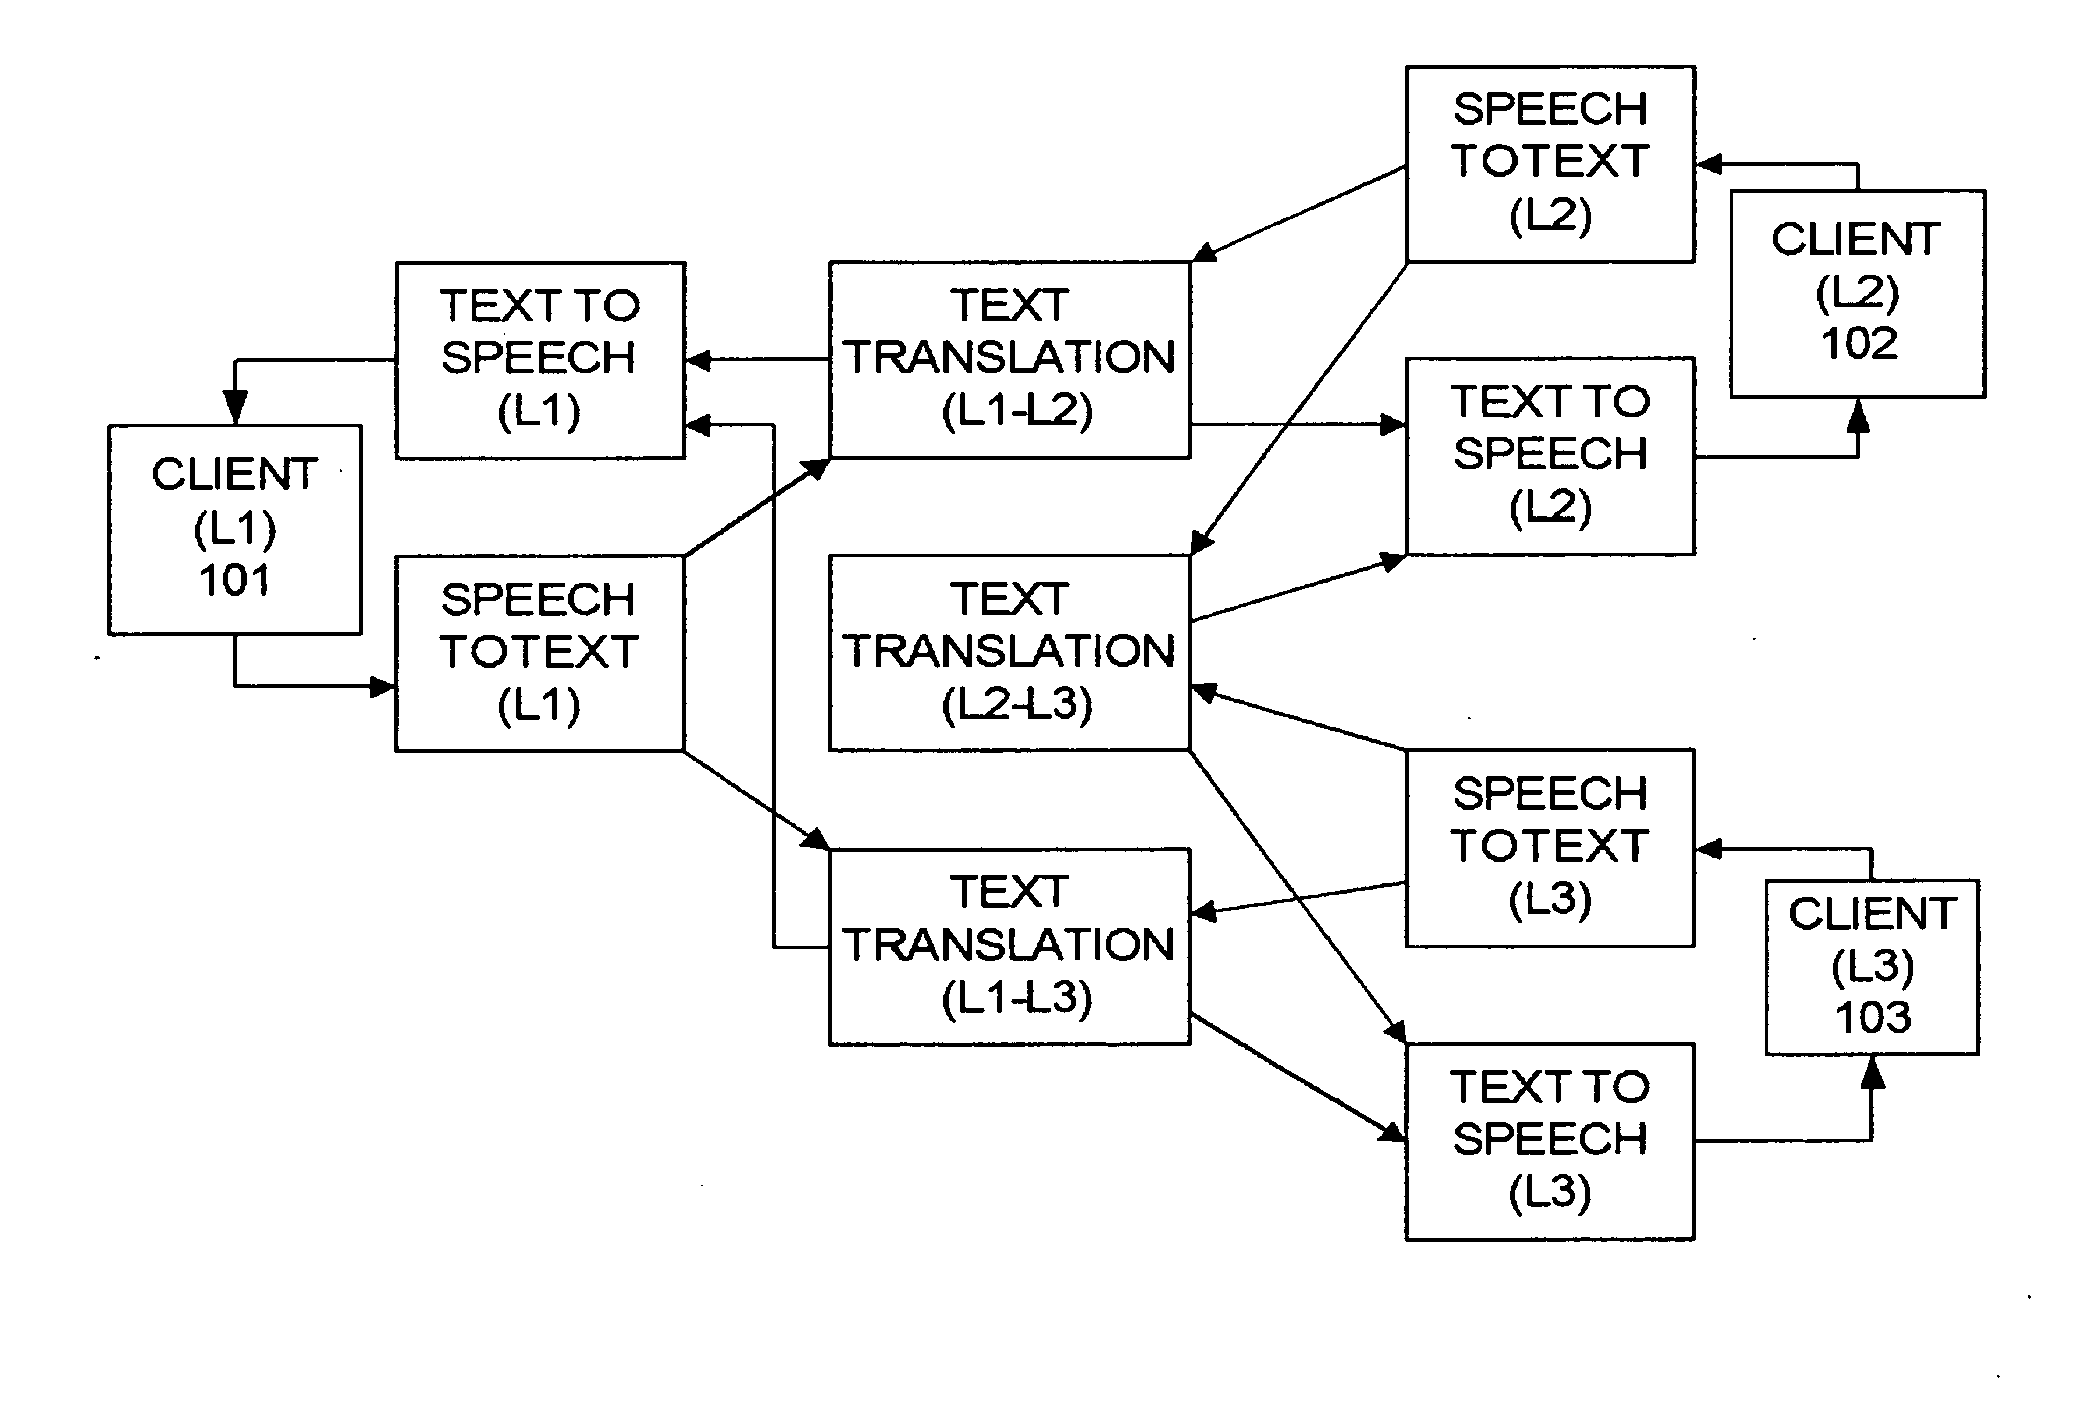 Method and apparatus for translating speech during a call